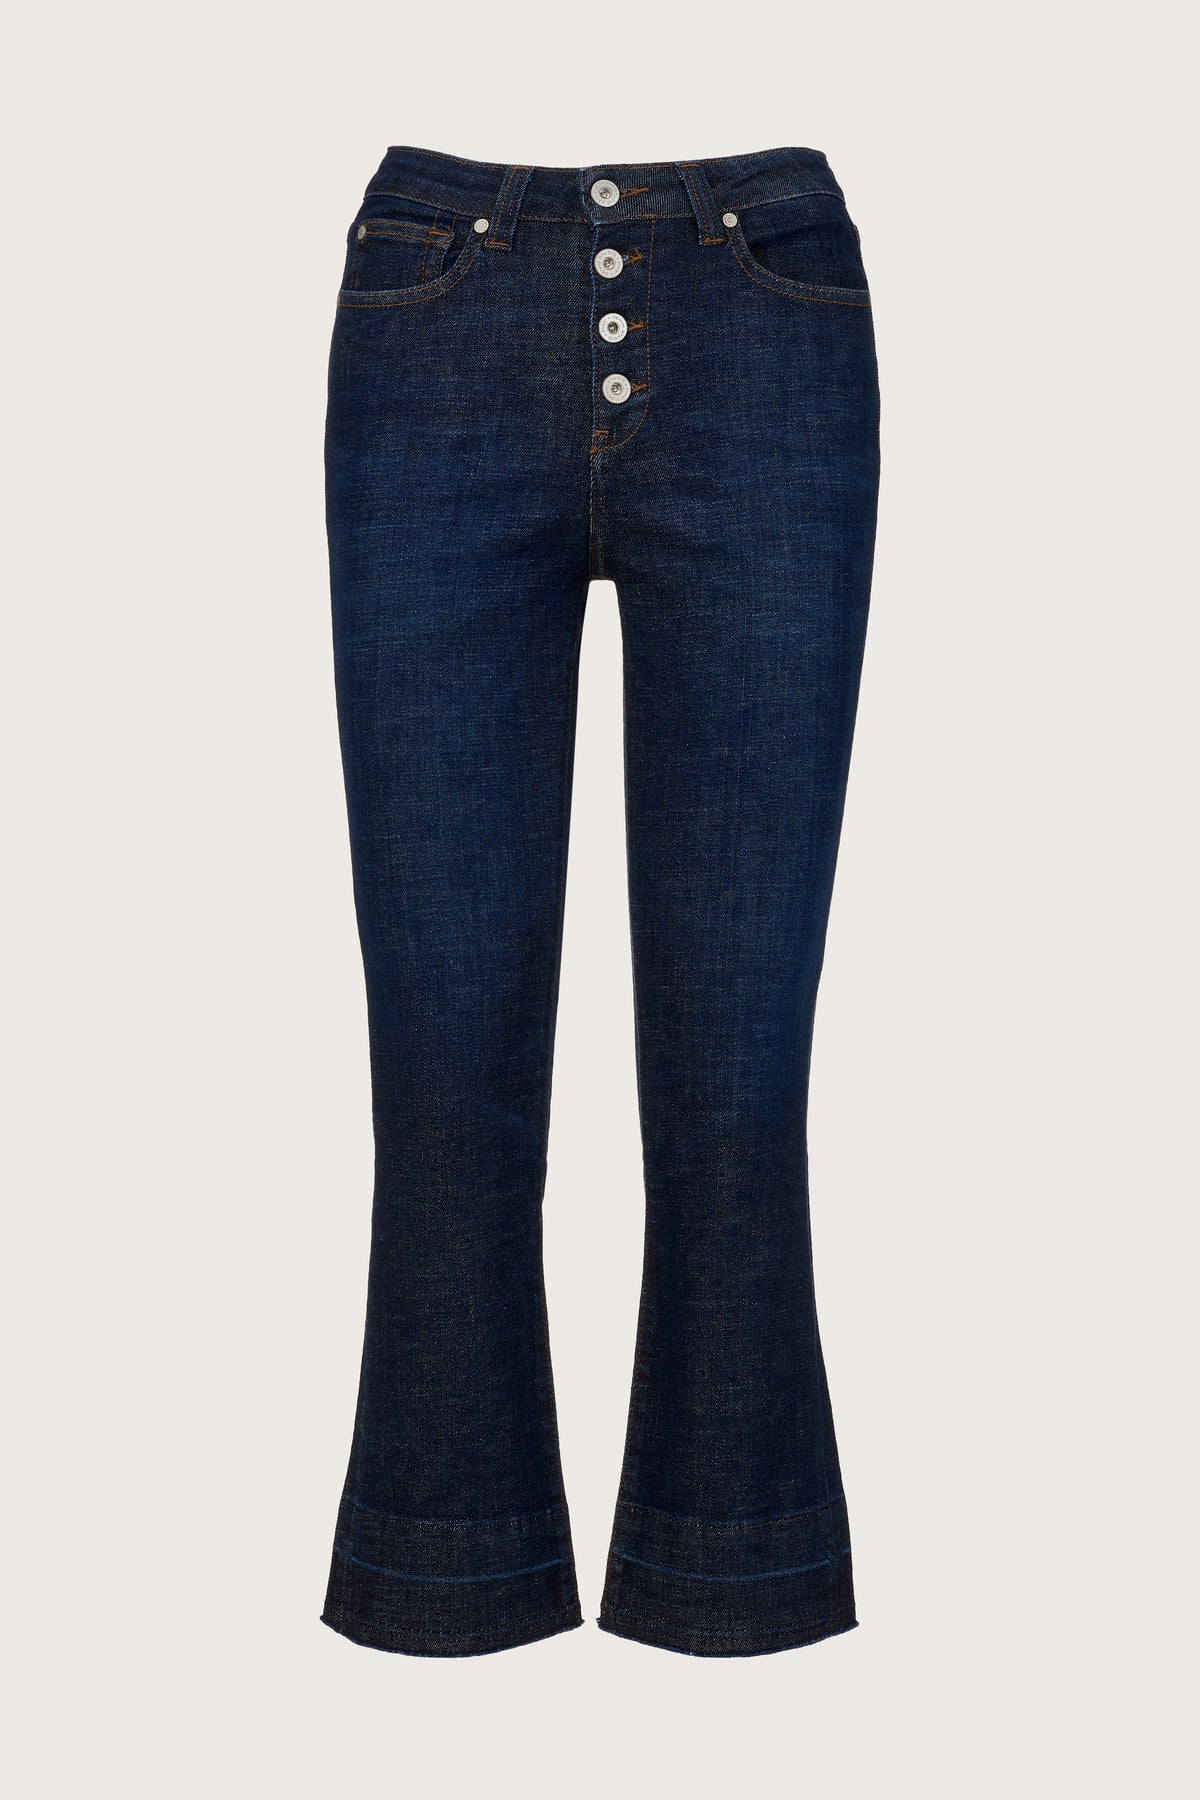 cropped kick flare jeans with a raw hem and visible button fly